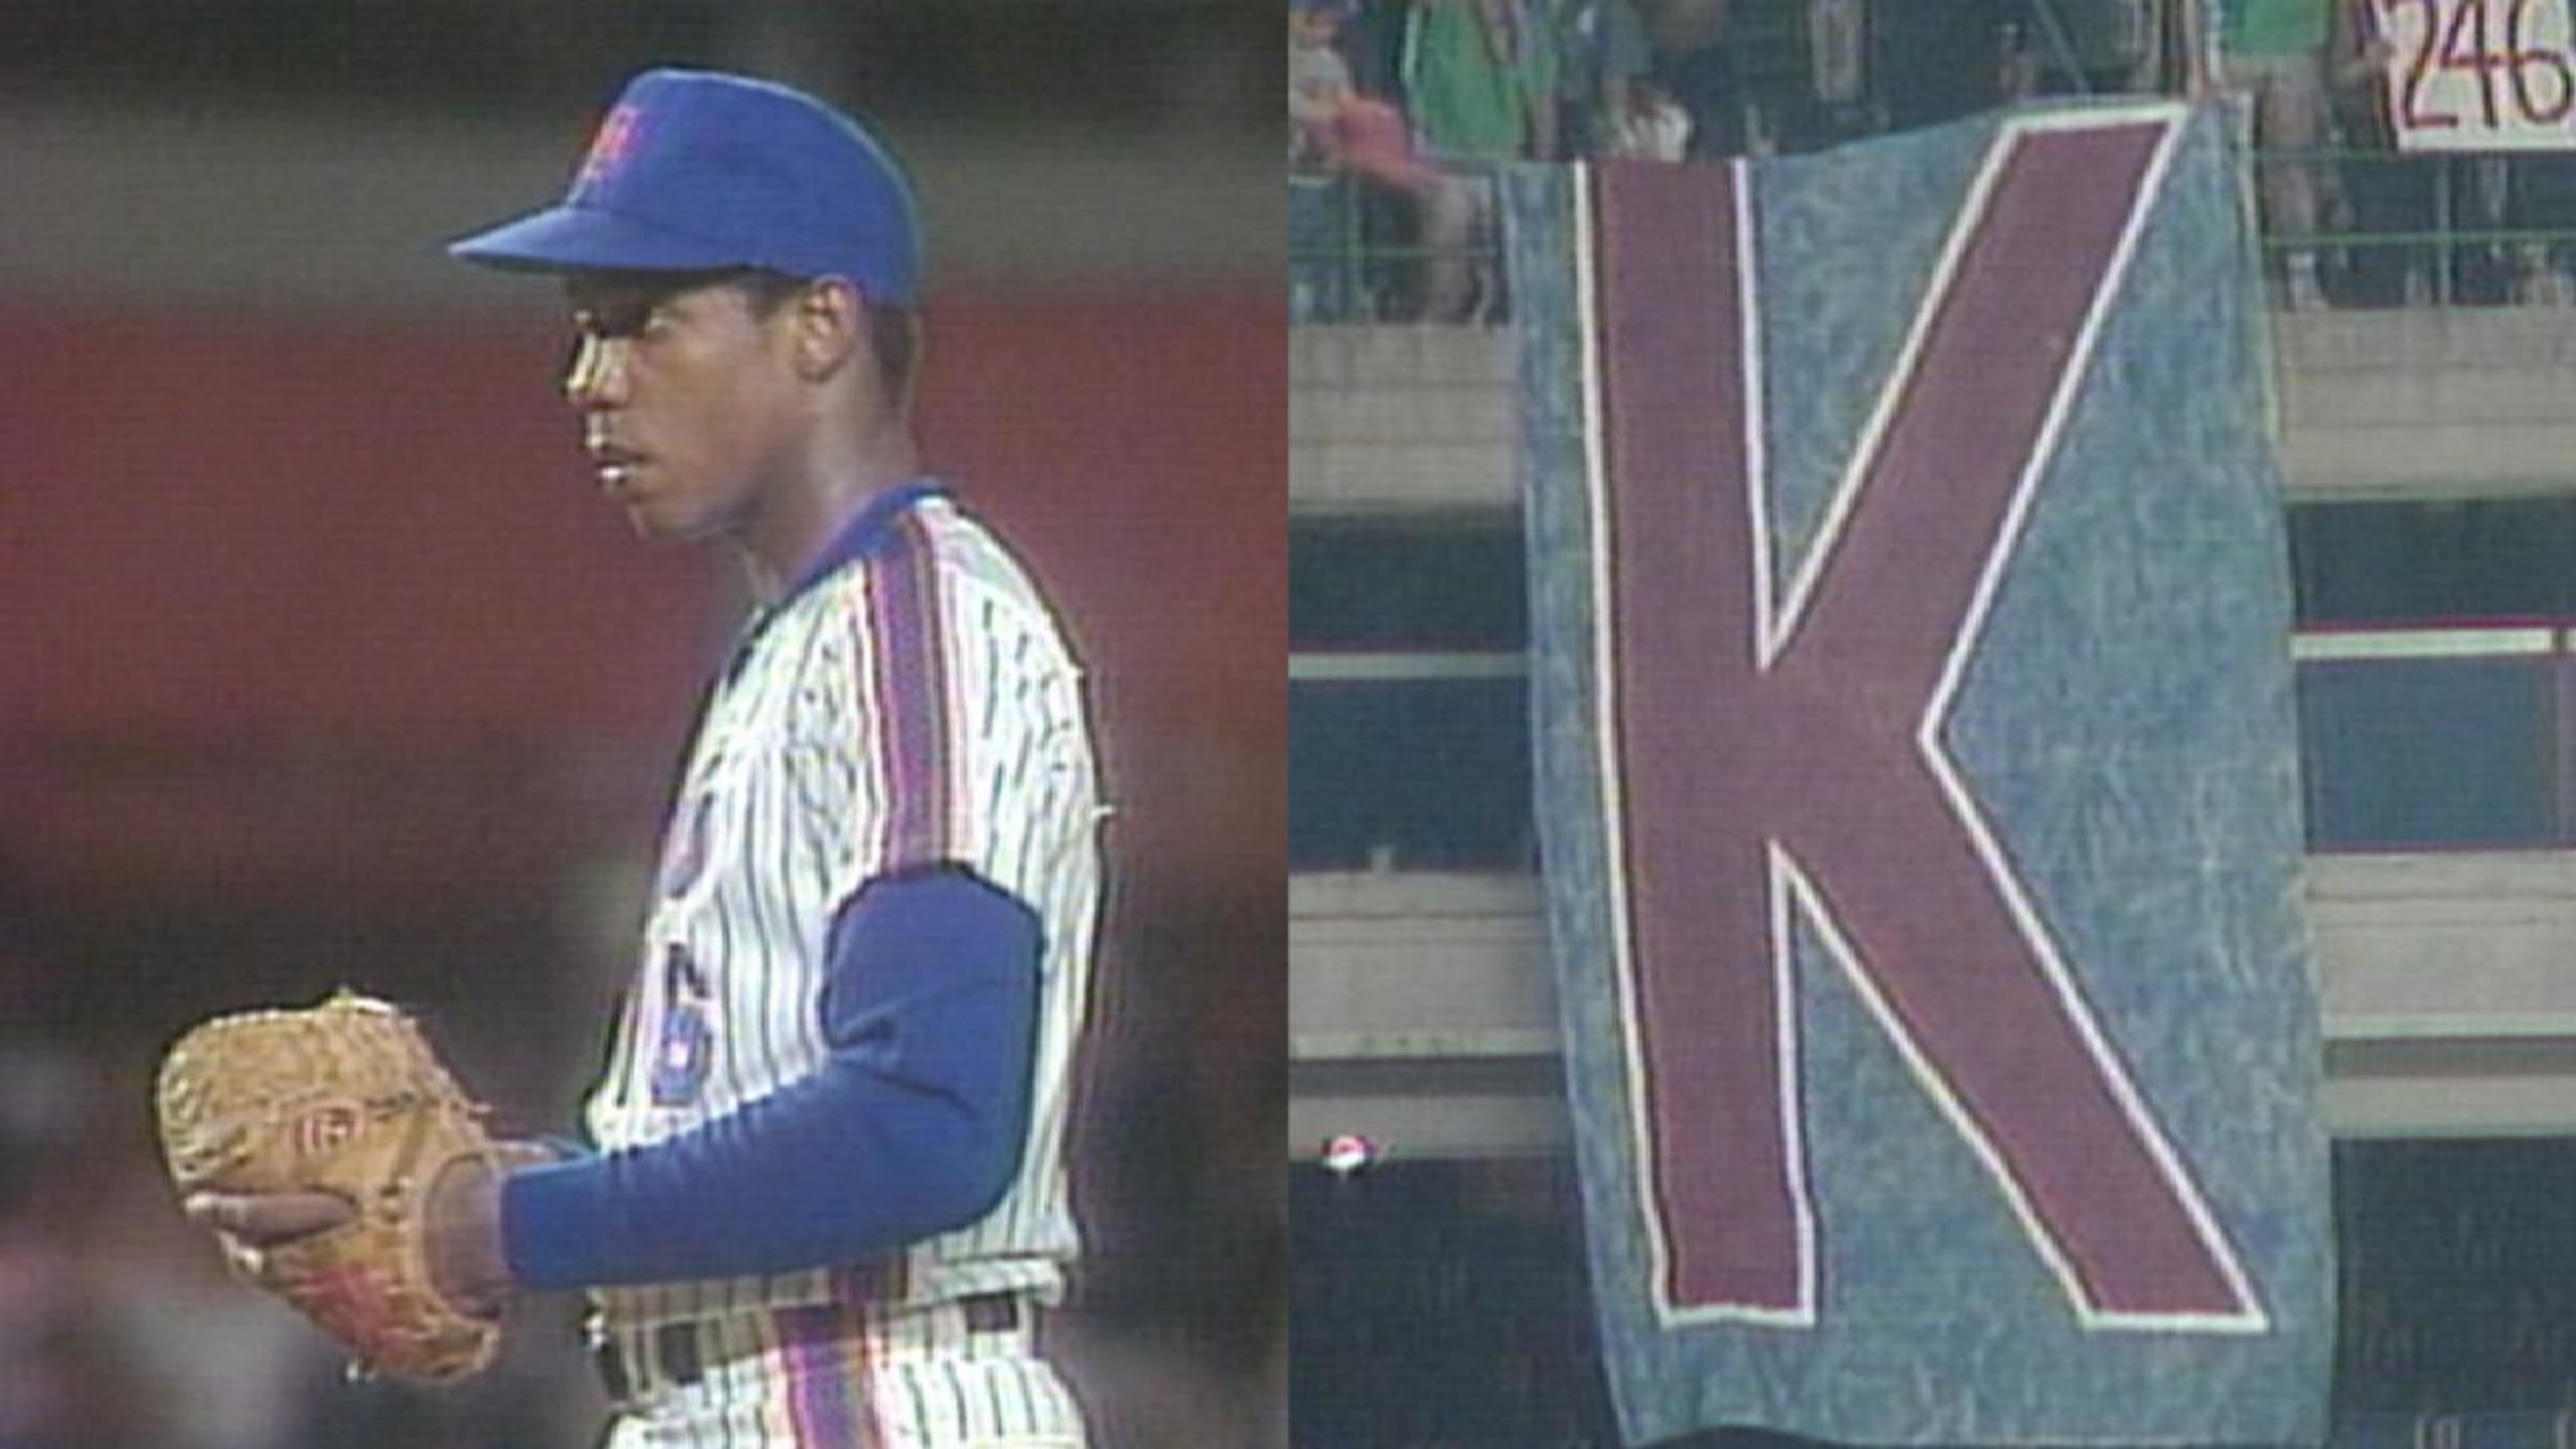 Mets to retire numbers of Darryl Strawberry, Dwight Gooden